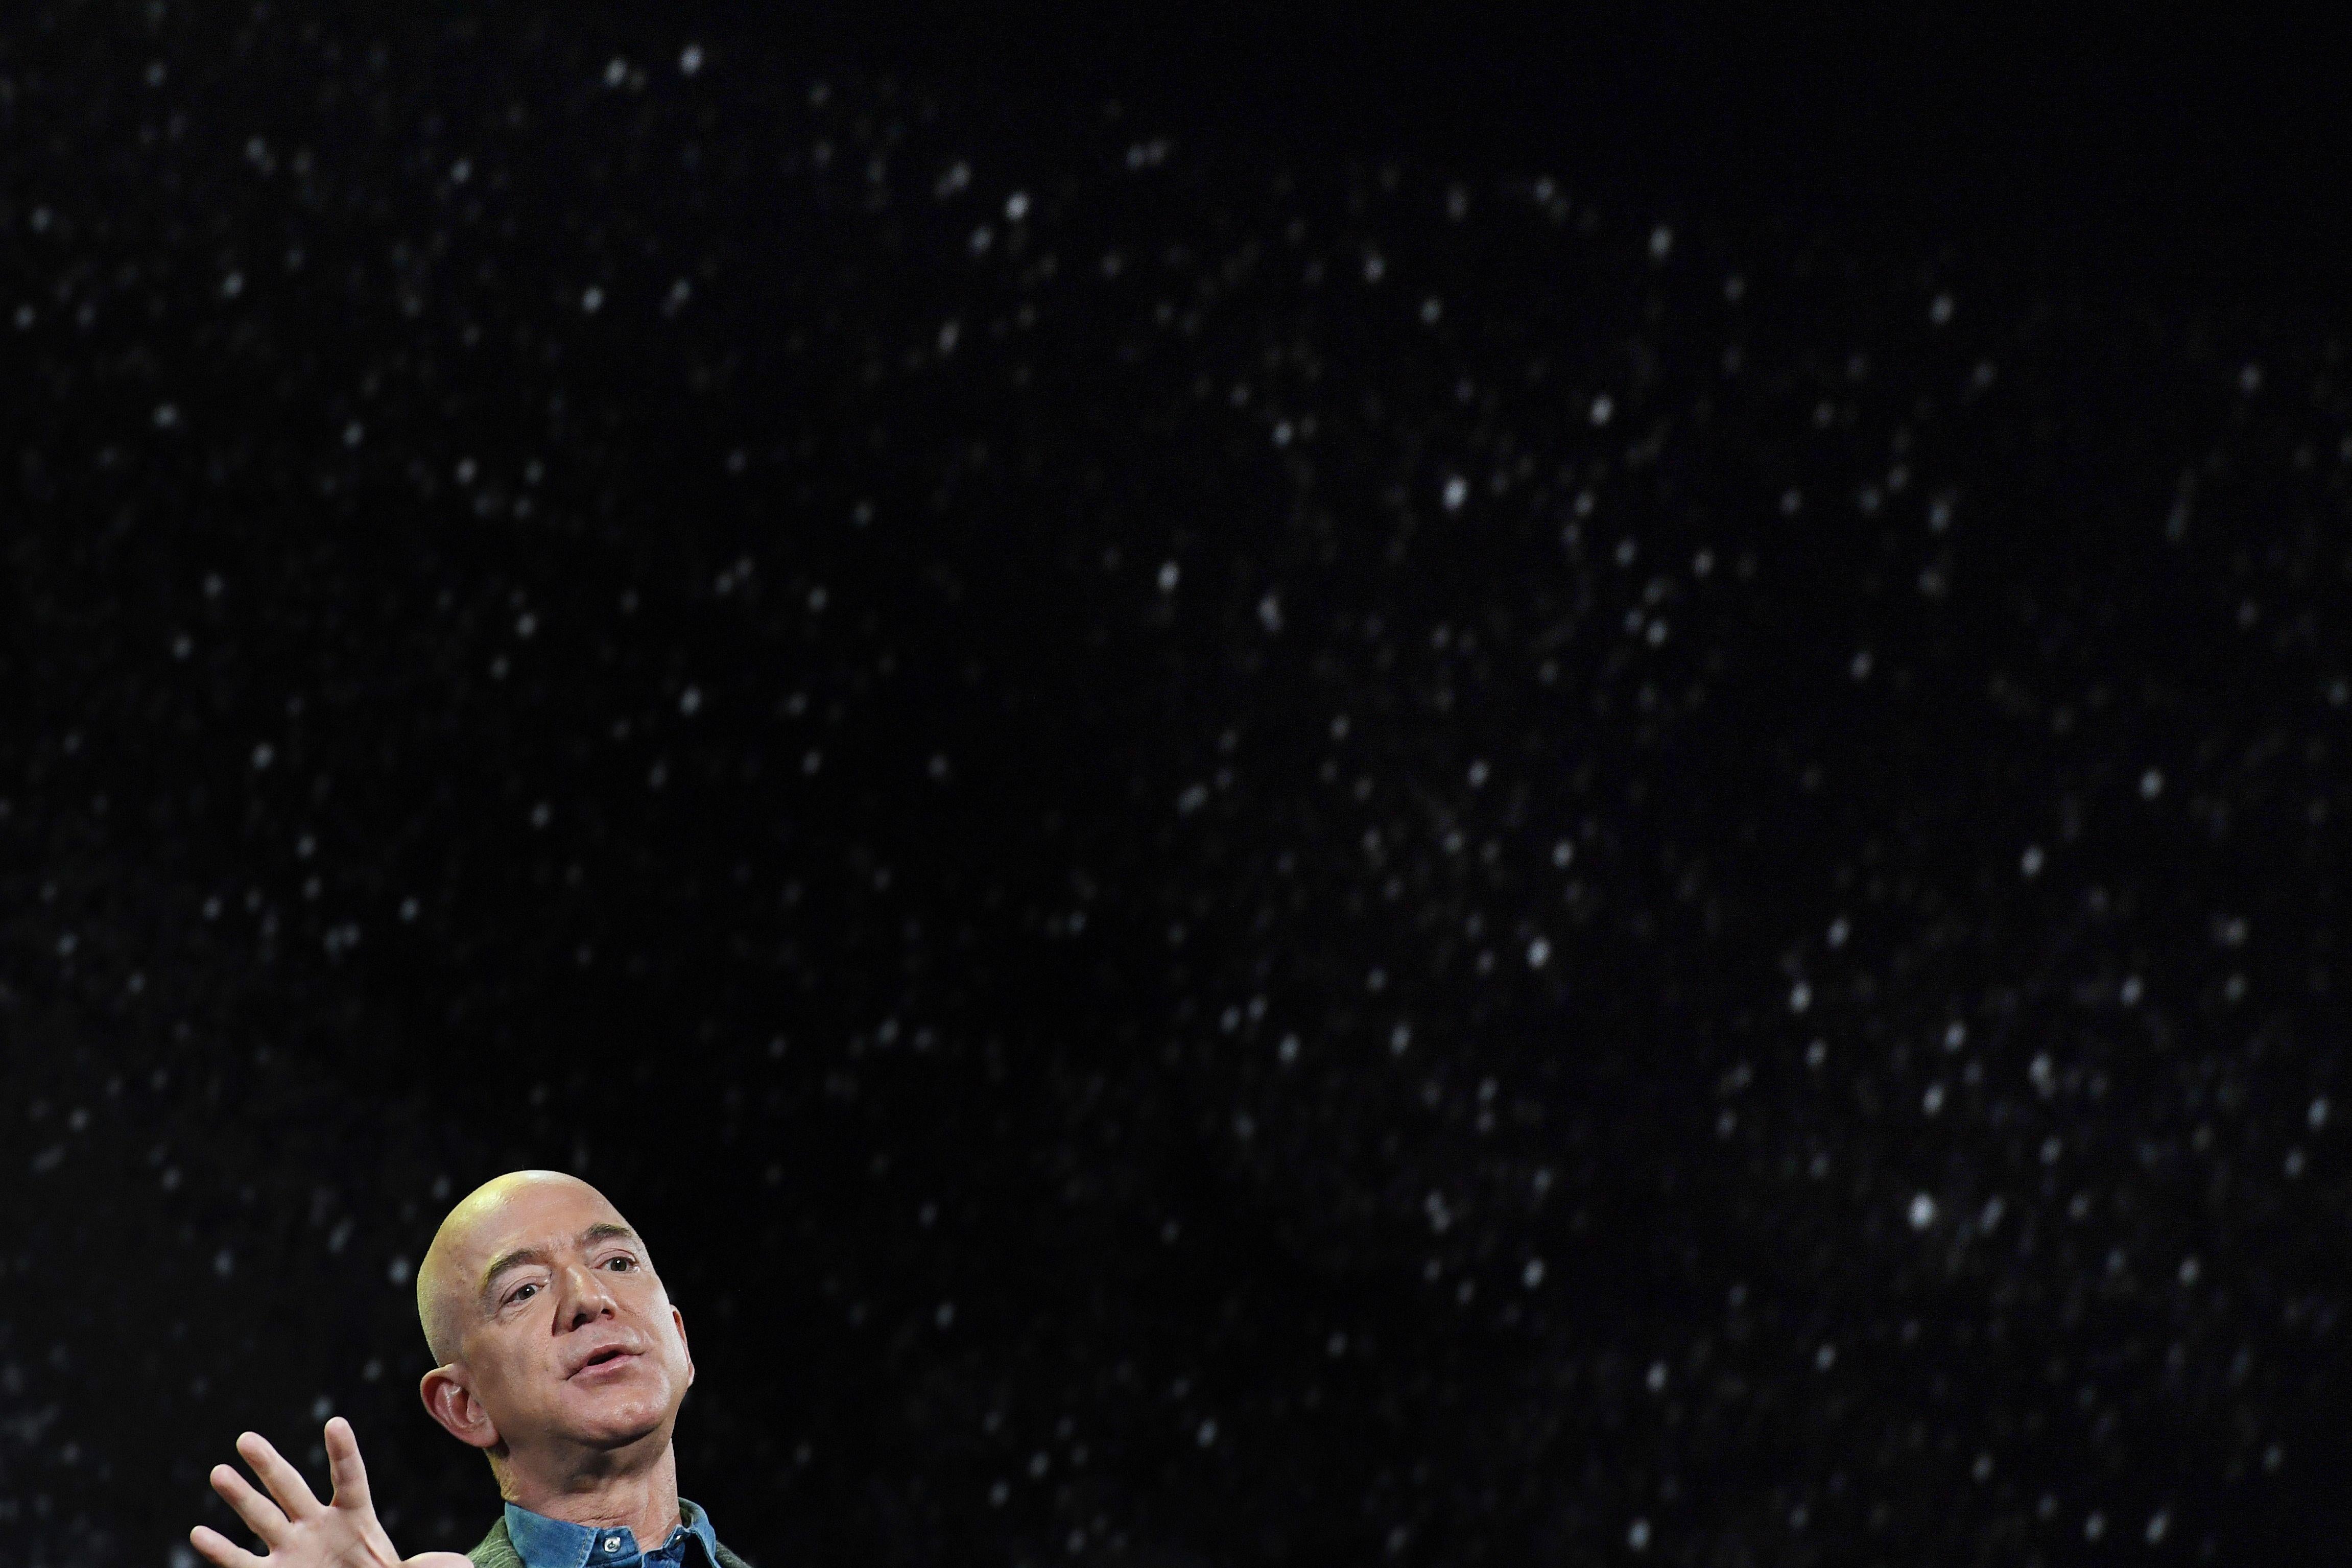 Jeff Bezos raises one hand while speaking, in front of a background of stars.